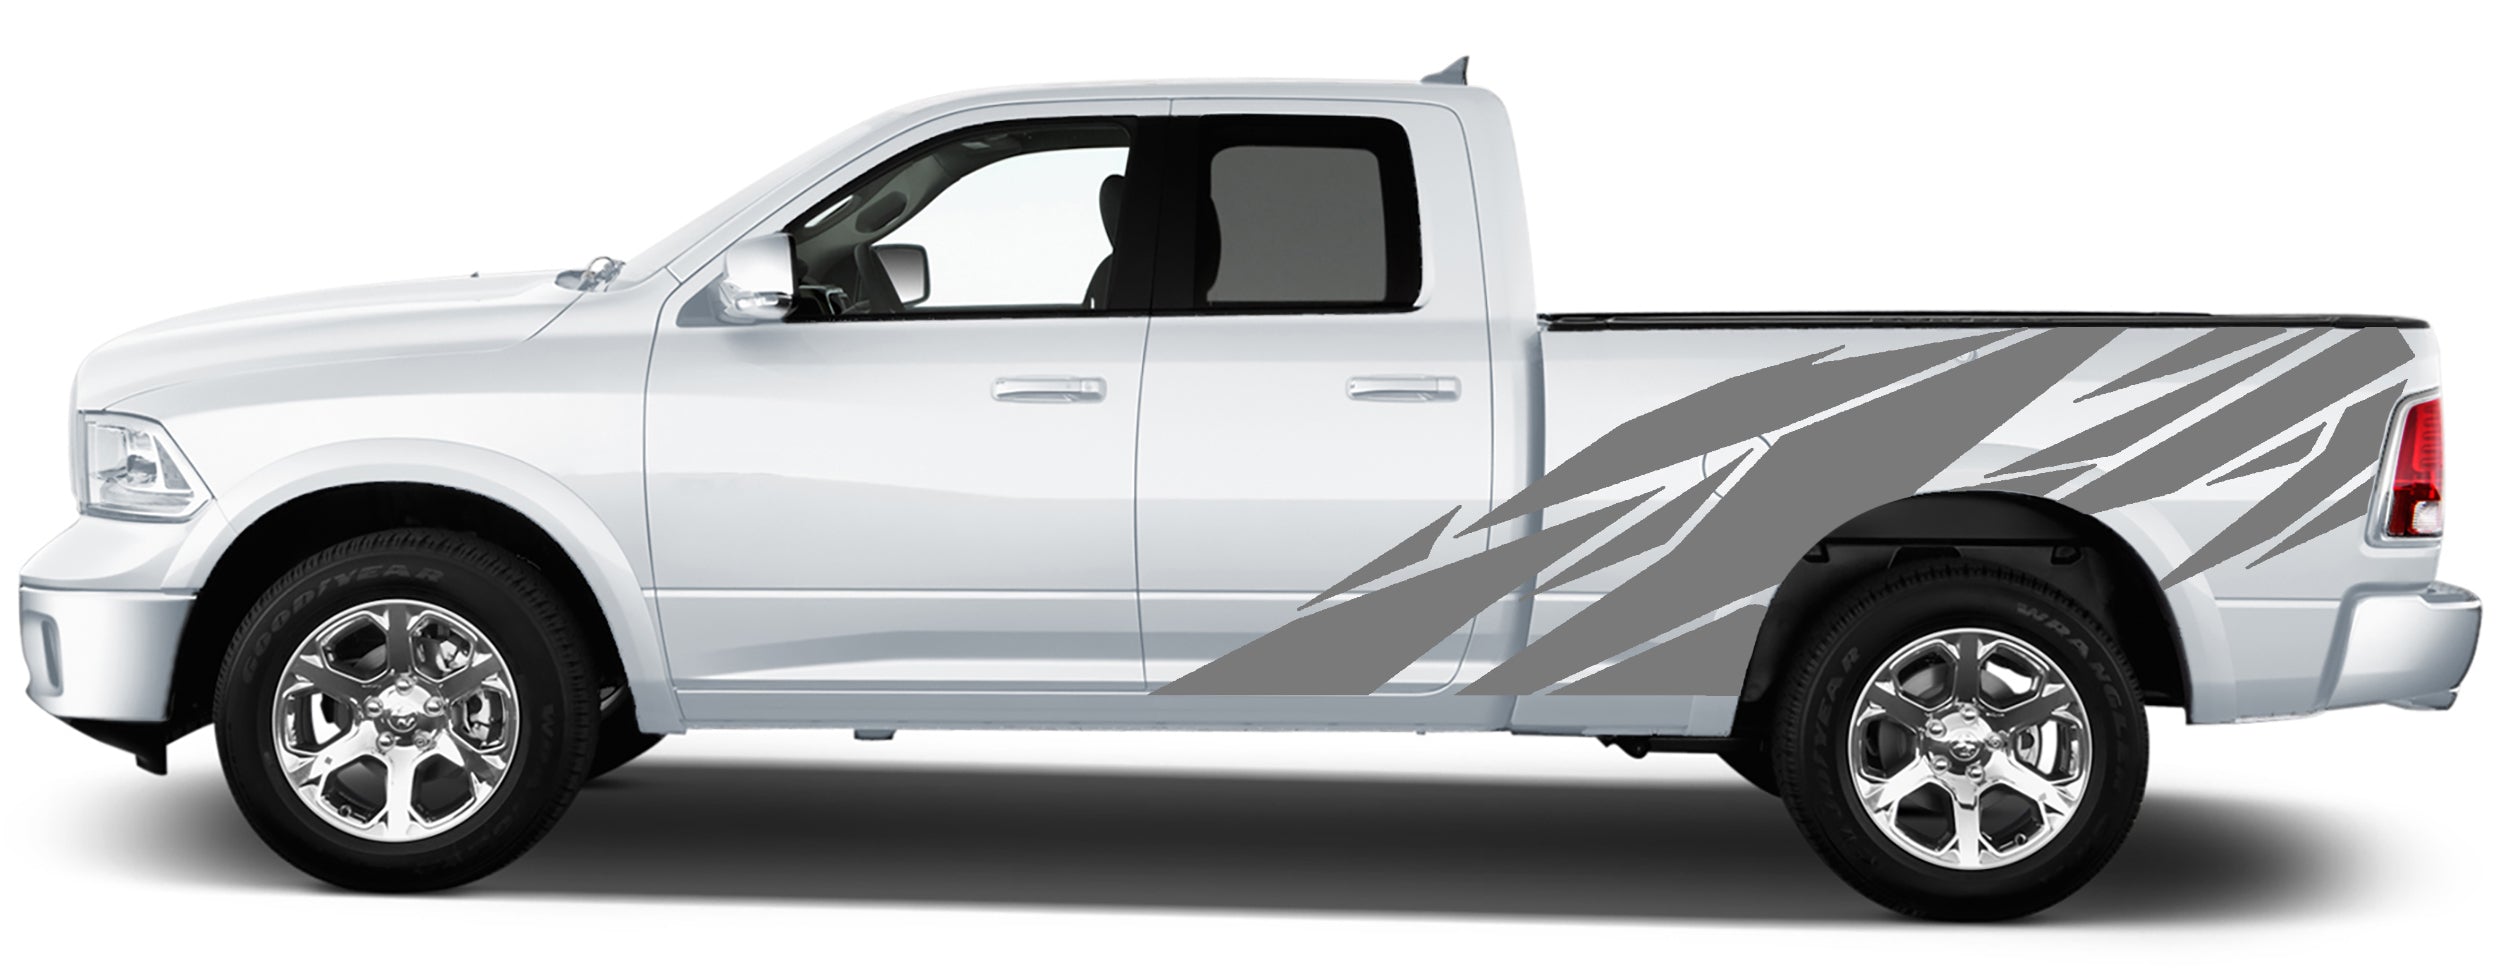 geometric side graphics for dodge ram 2008 to 2018 models gray